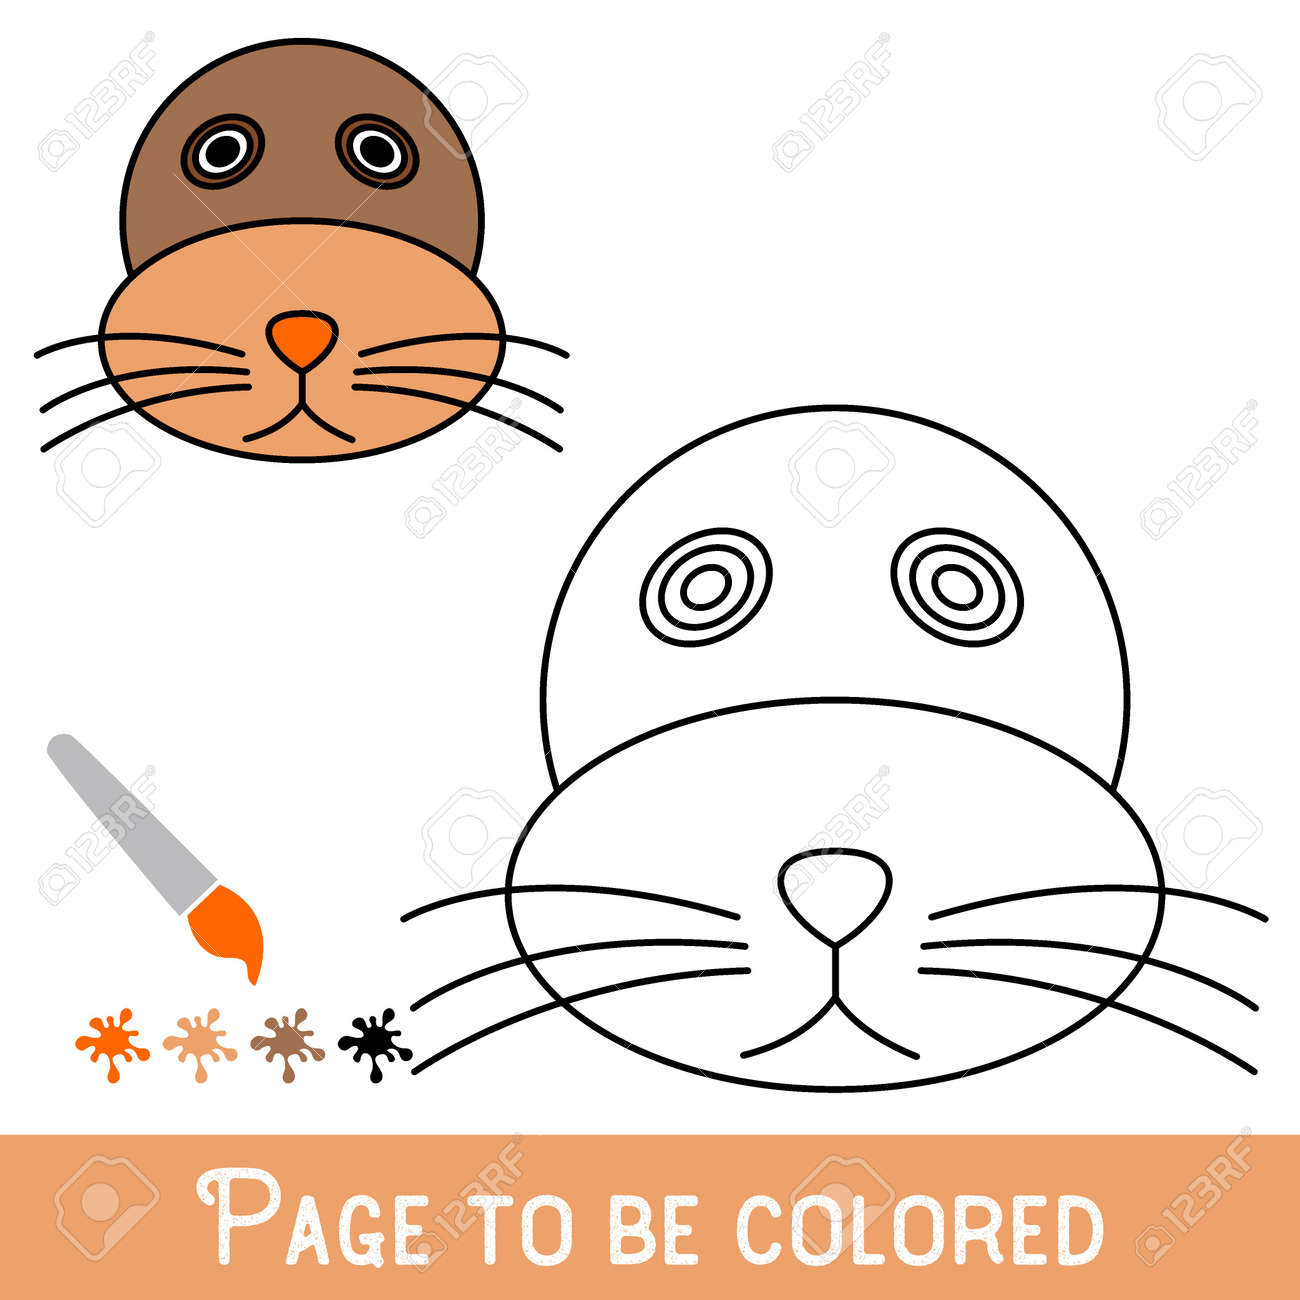 Funny sea lion face to be colored the coloring book for preschool kids with easy educational gaming level royalty free svg cliparts vectors and stock illustration image